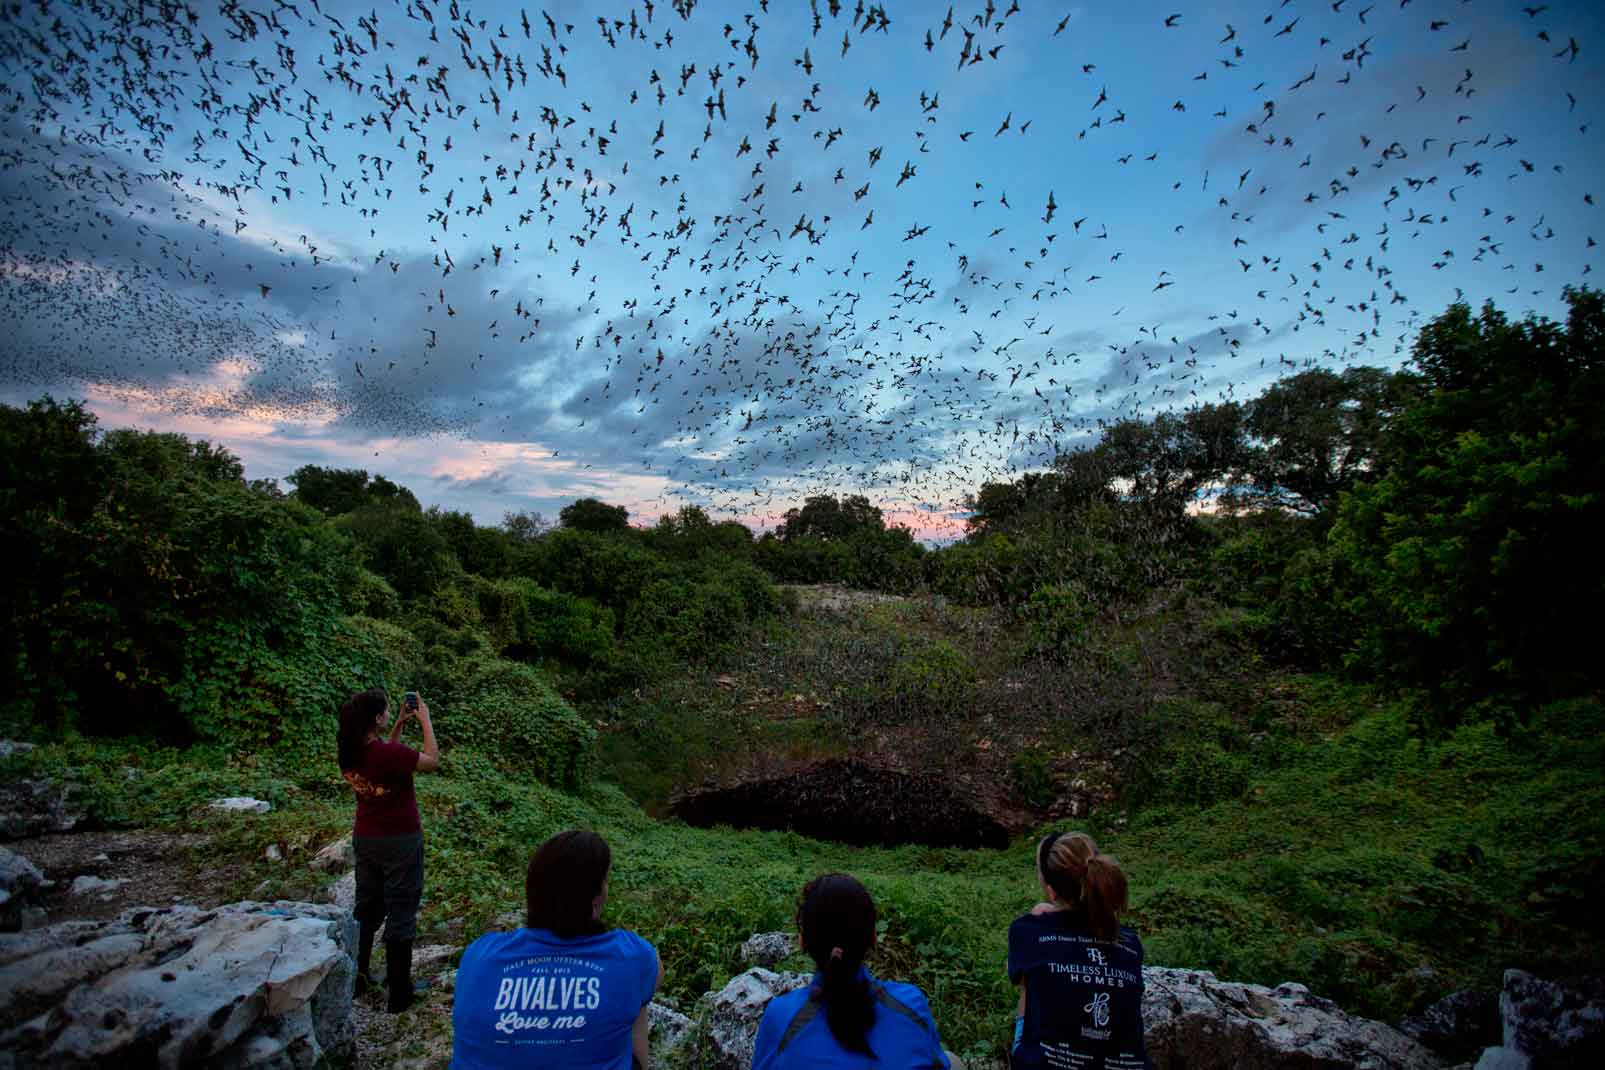 Visitors at Bracken Cave shoot photos and video of the flight. Mexican free-tailed bats emerge in such large and dense concentrations that they appear as storm clouds on weather radar.